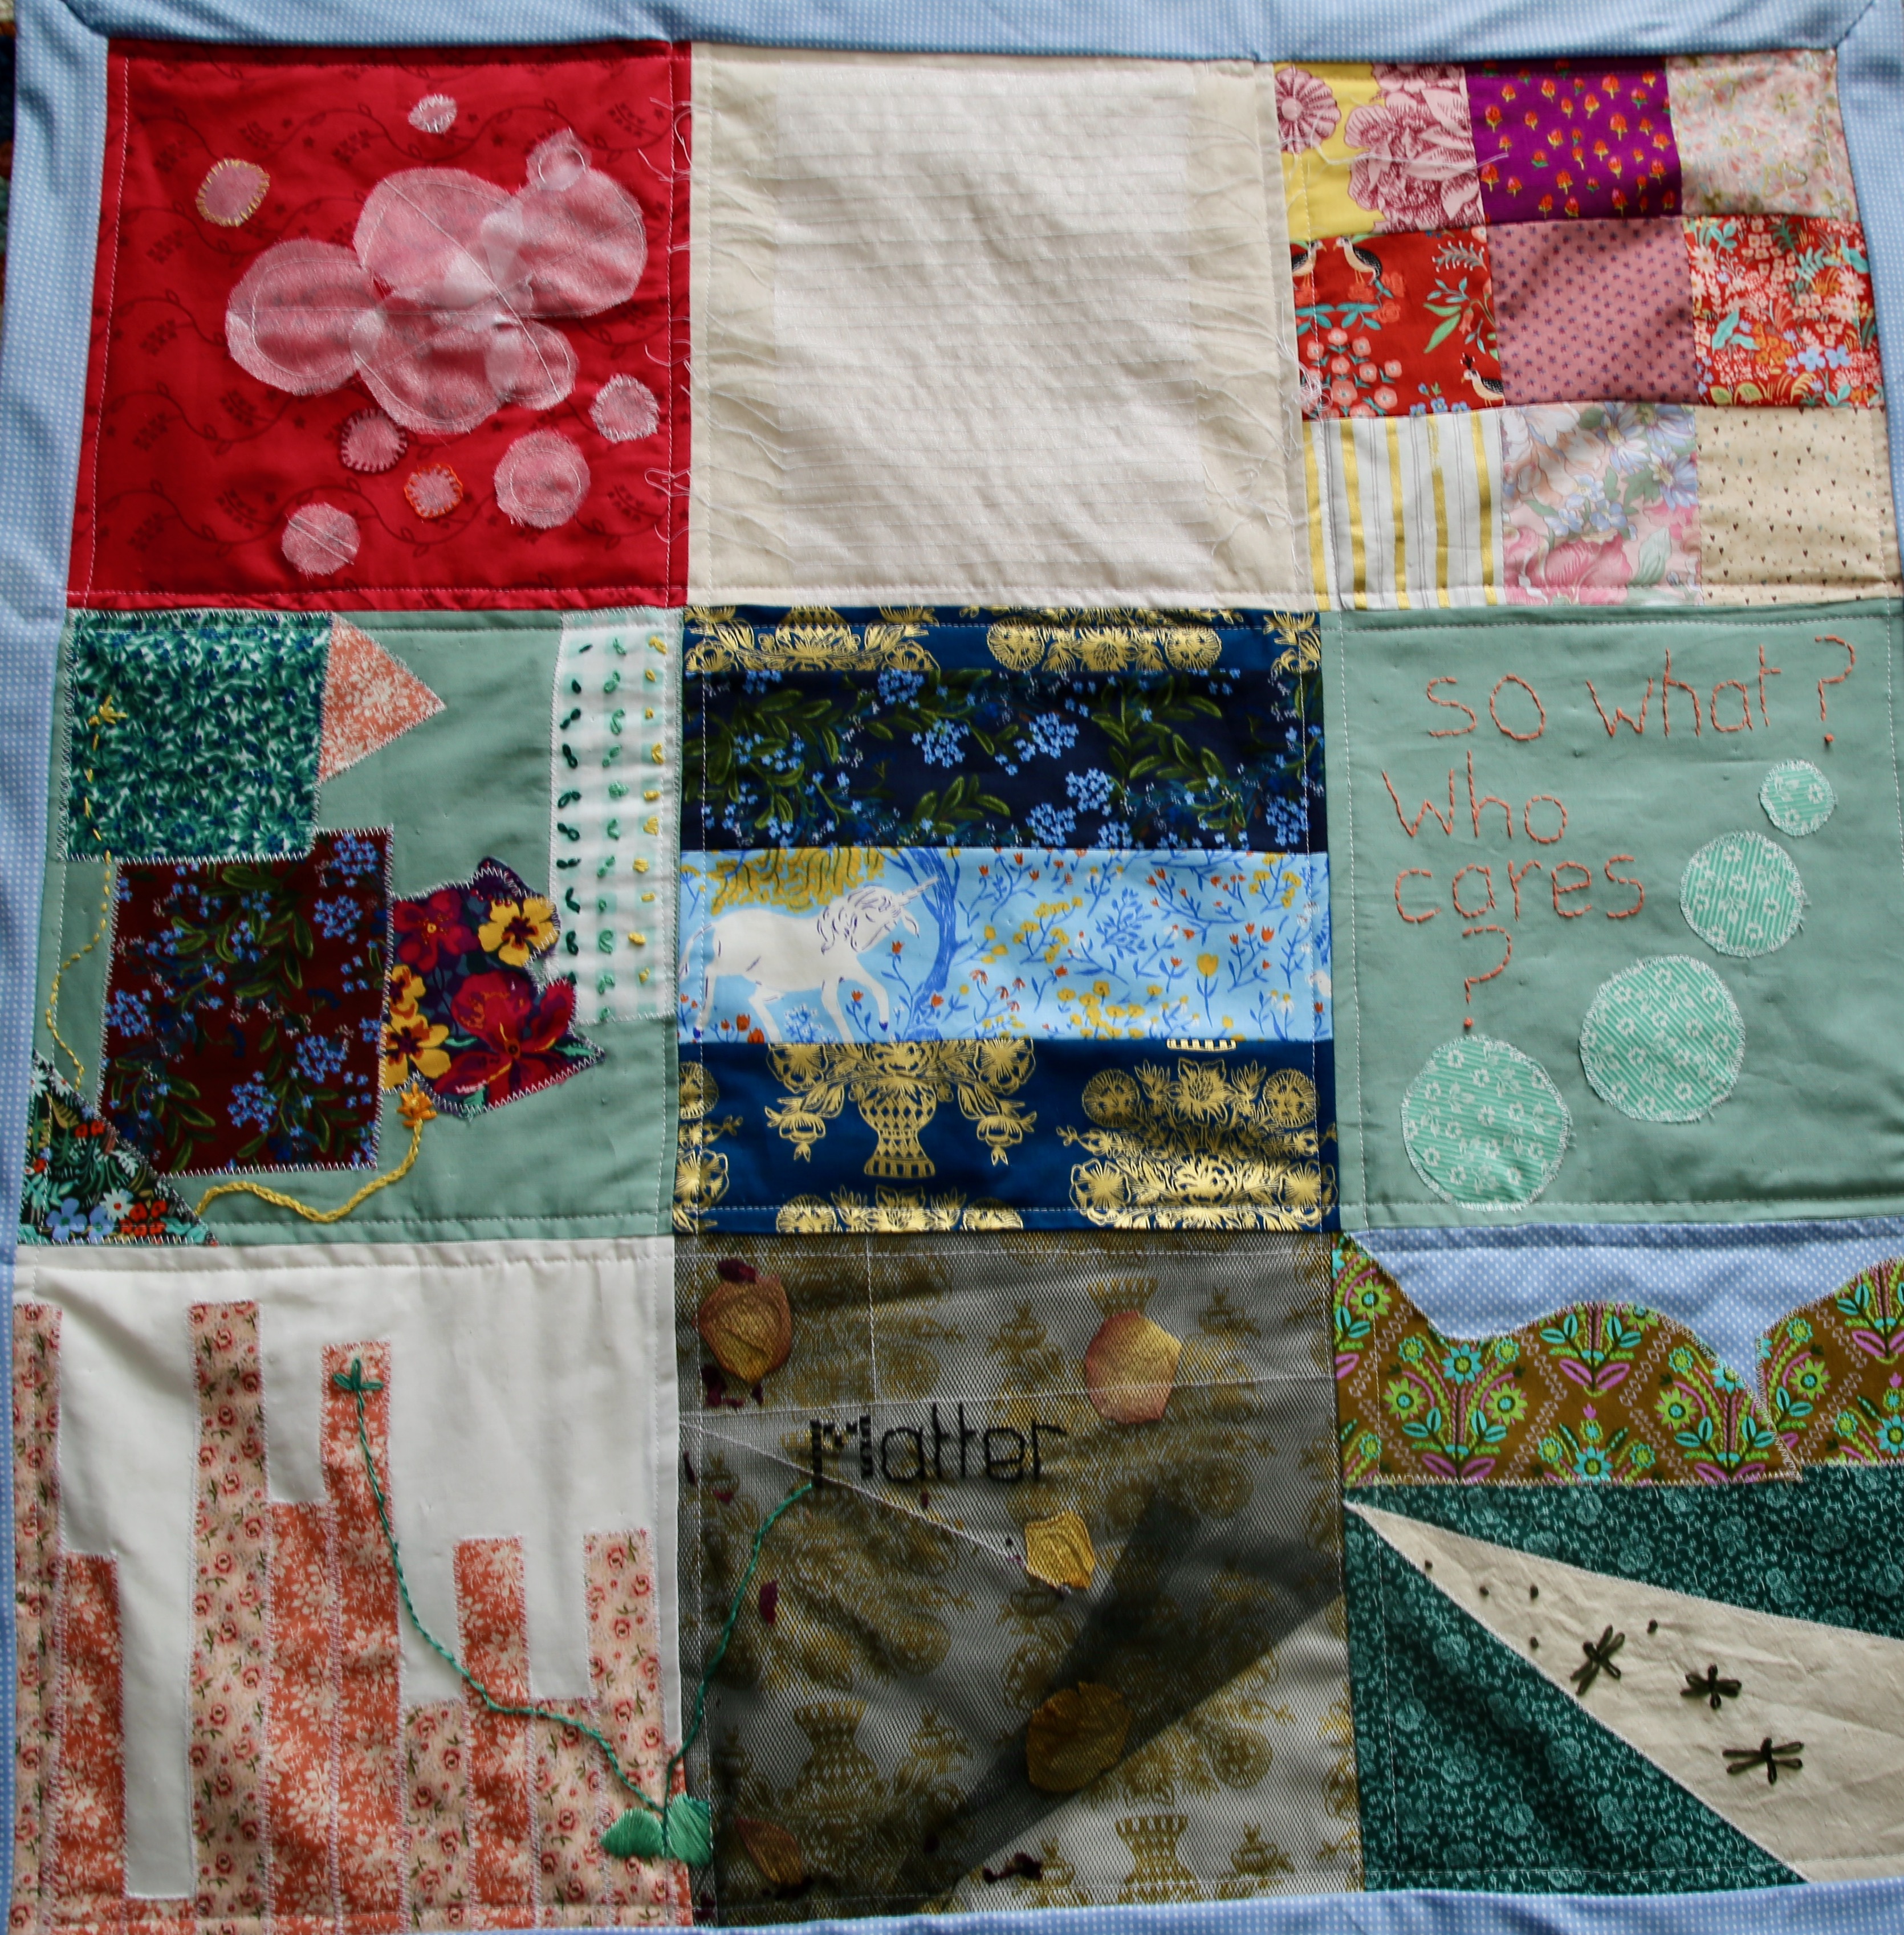 Figure 2: Completed quilt. Image provided by author.